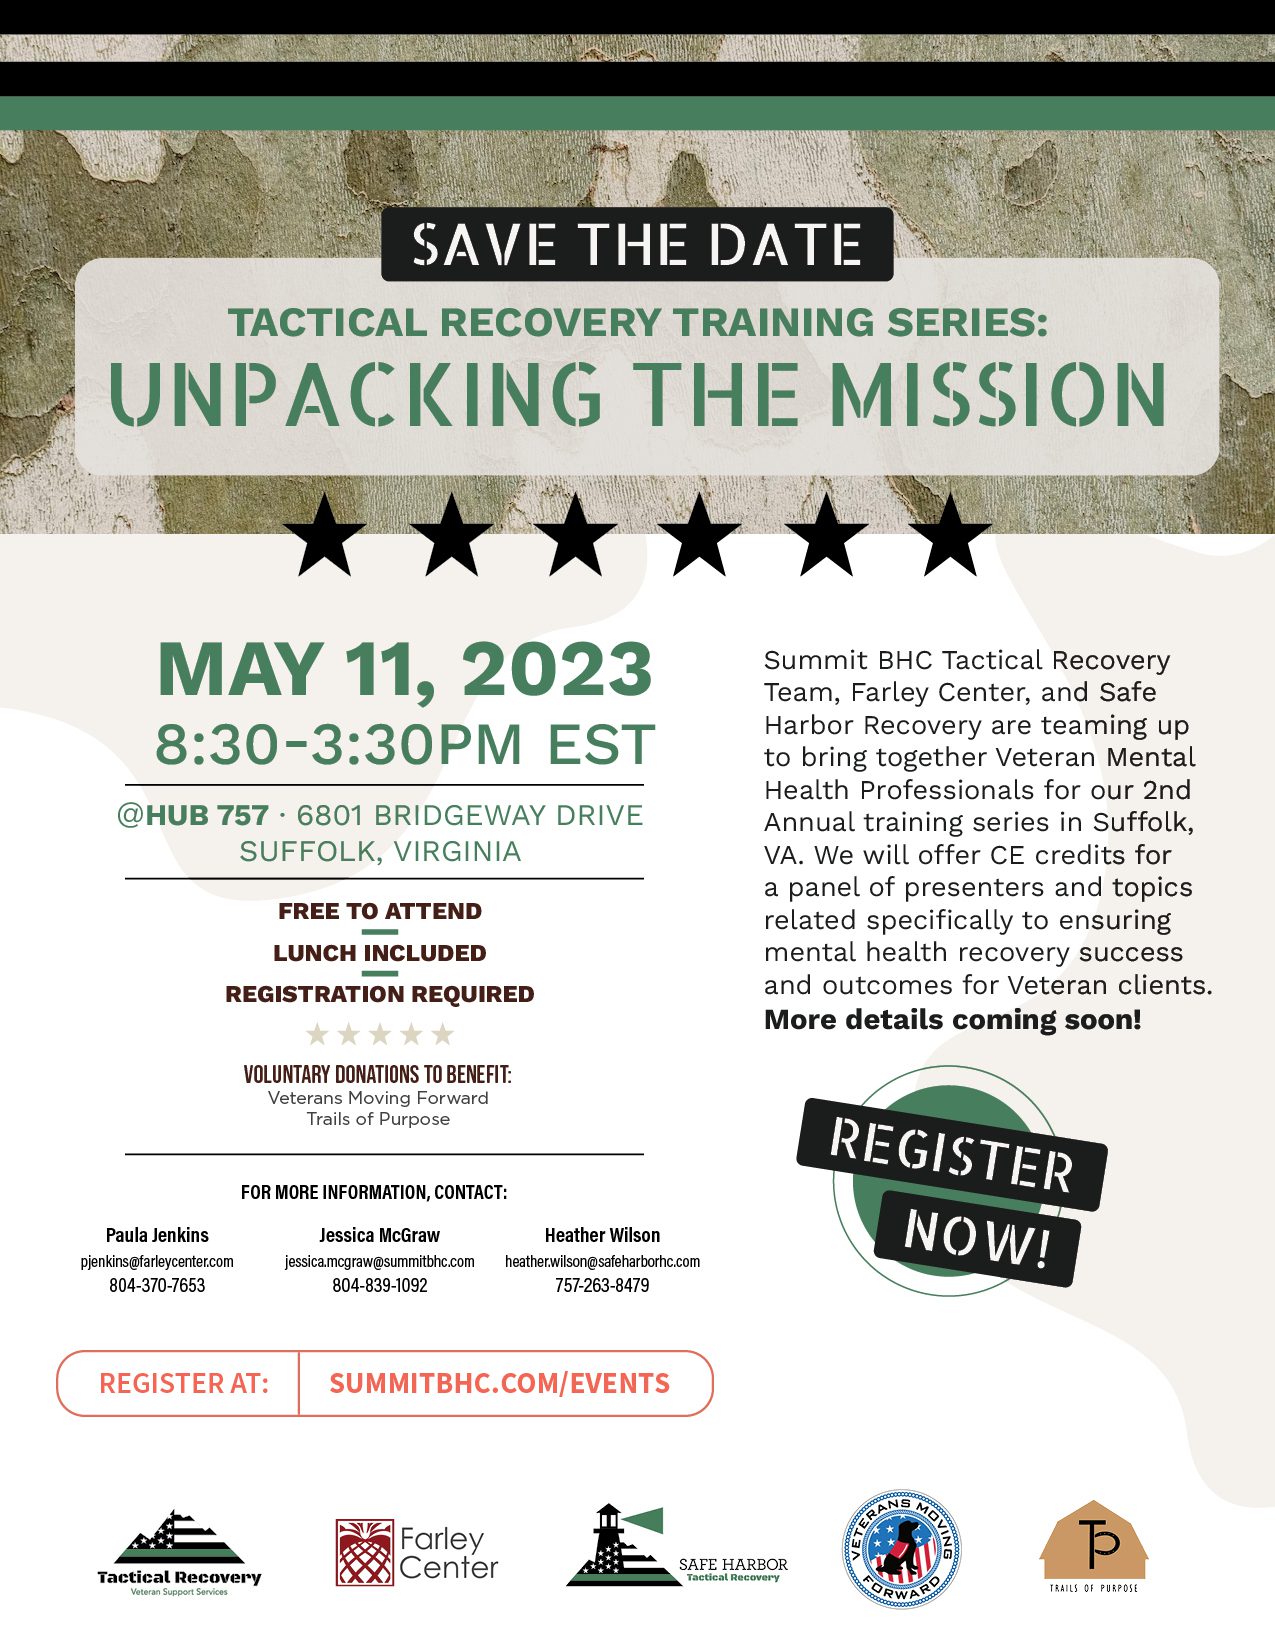 Unpacking the Mission. A Tactical Recovery Training Series Event